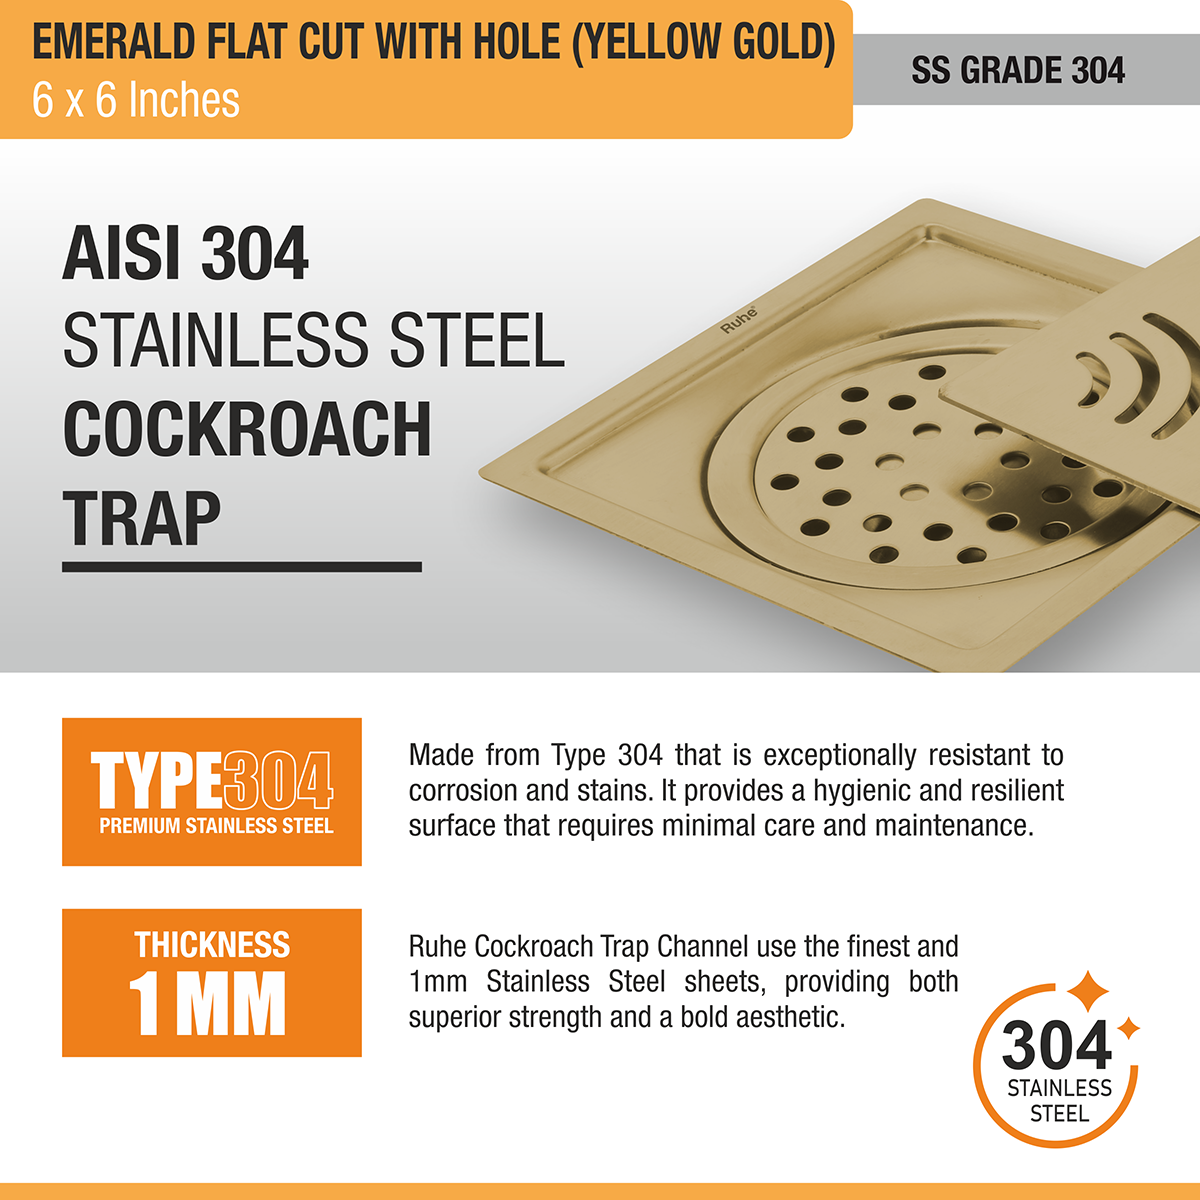 Emerald Square Flat Cut Floor Drain in Yellow Gold PVD Coating (6 x 6 Inches) with Hole stainless steel